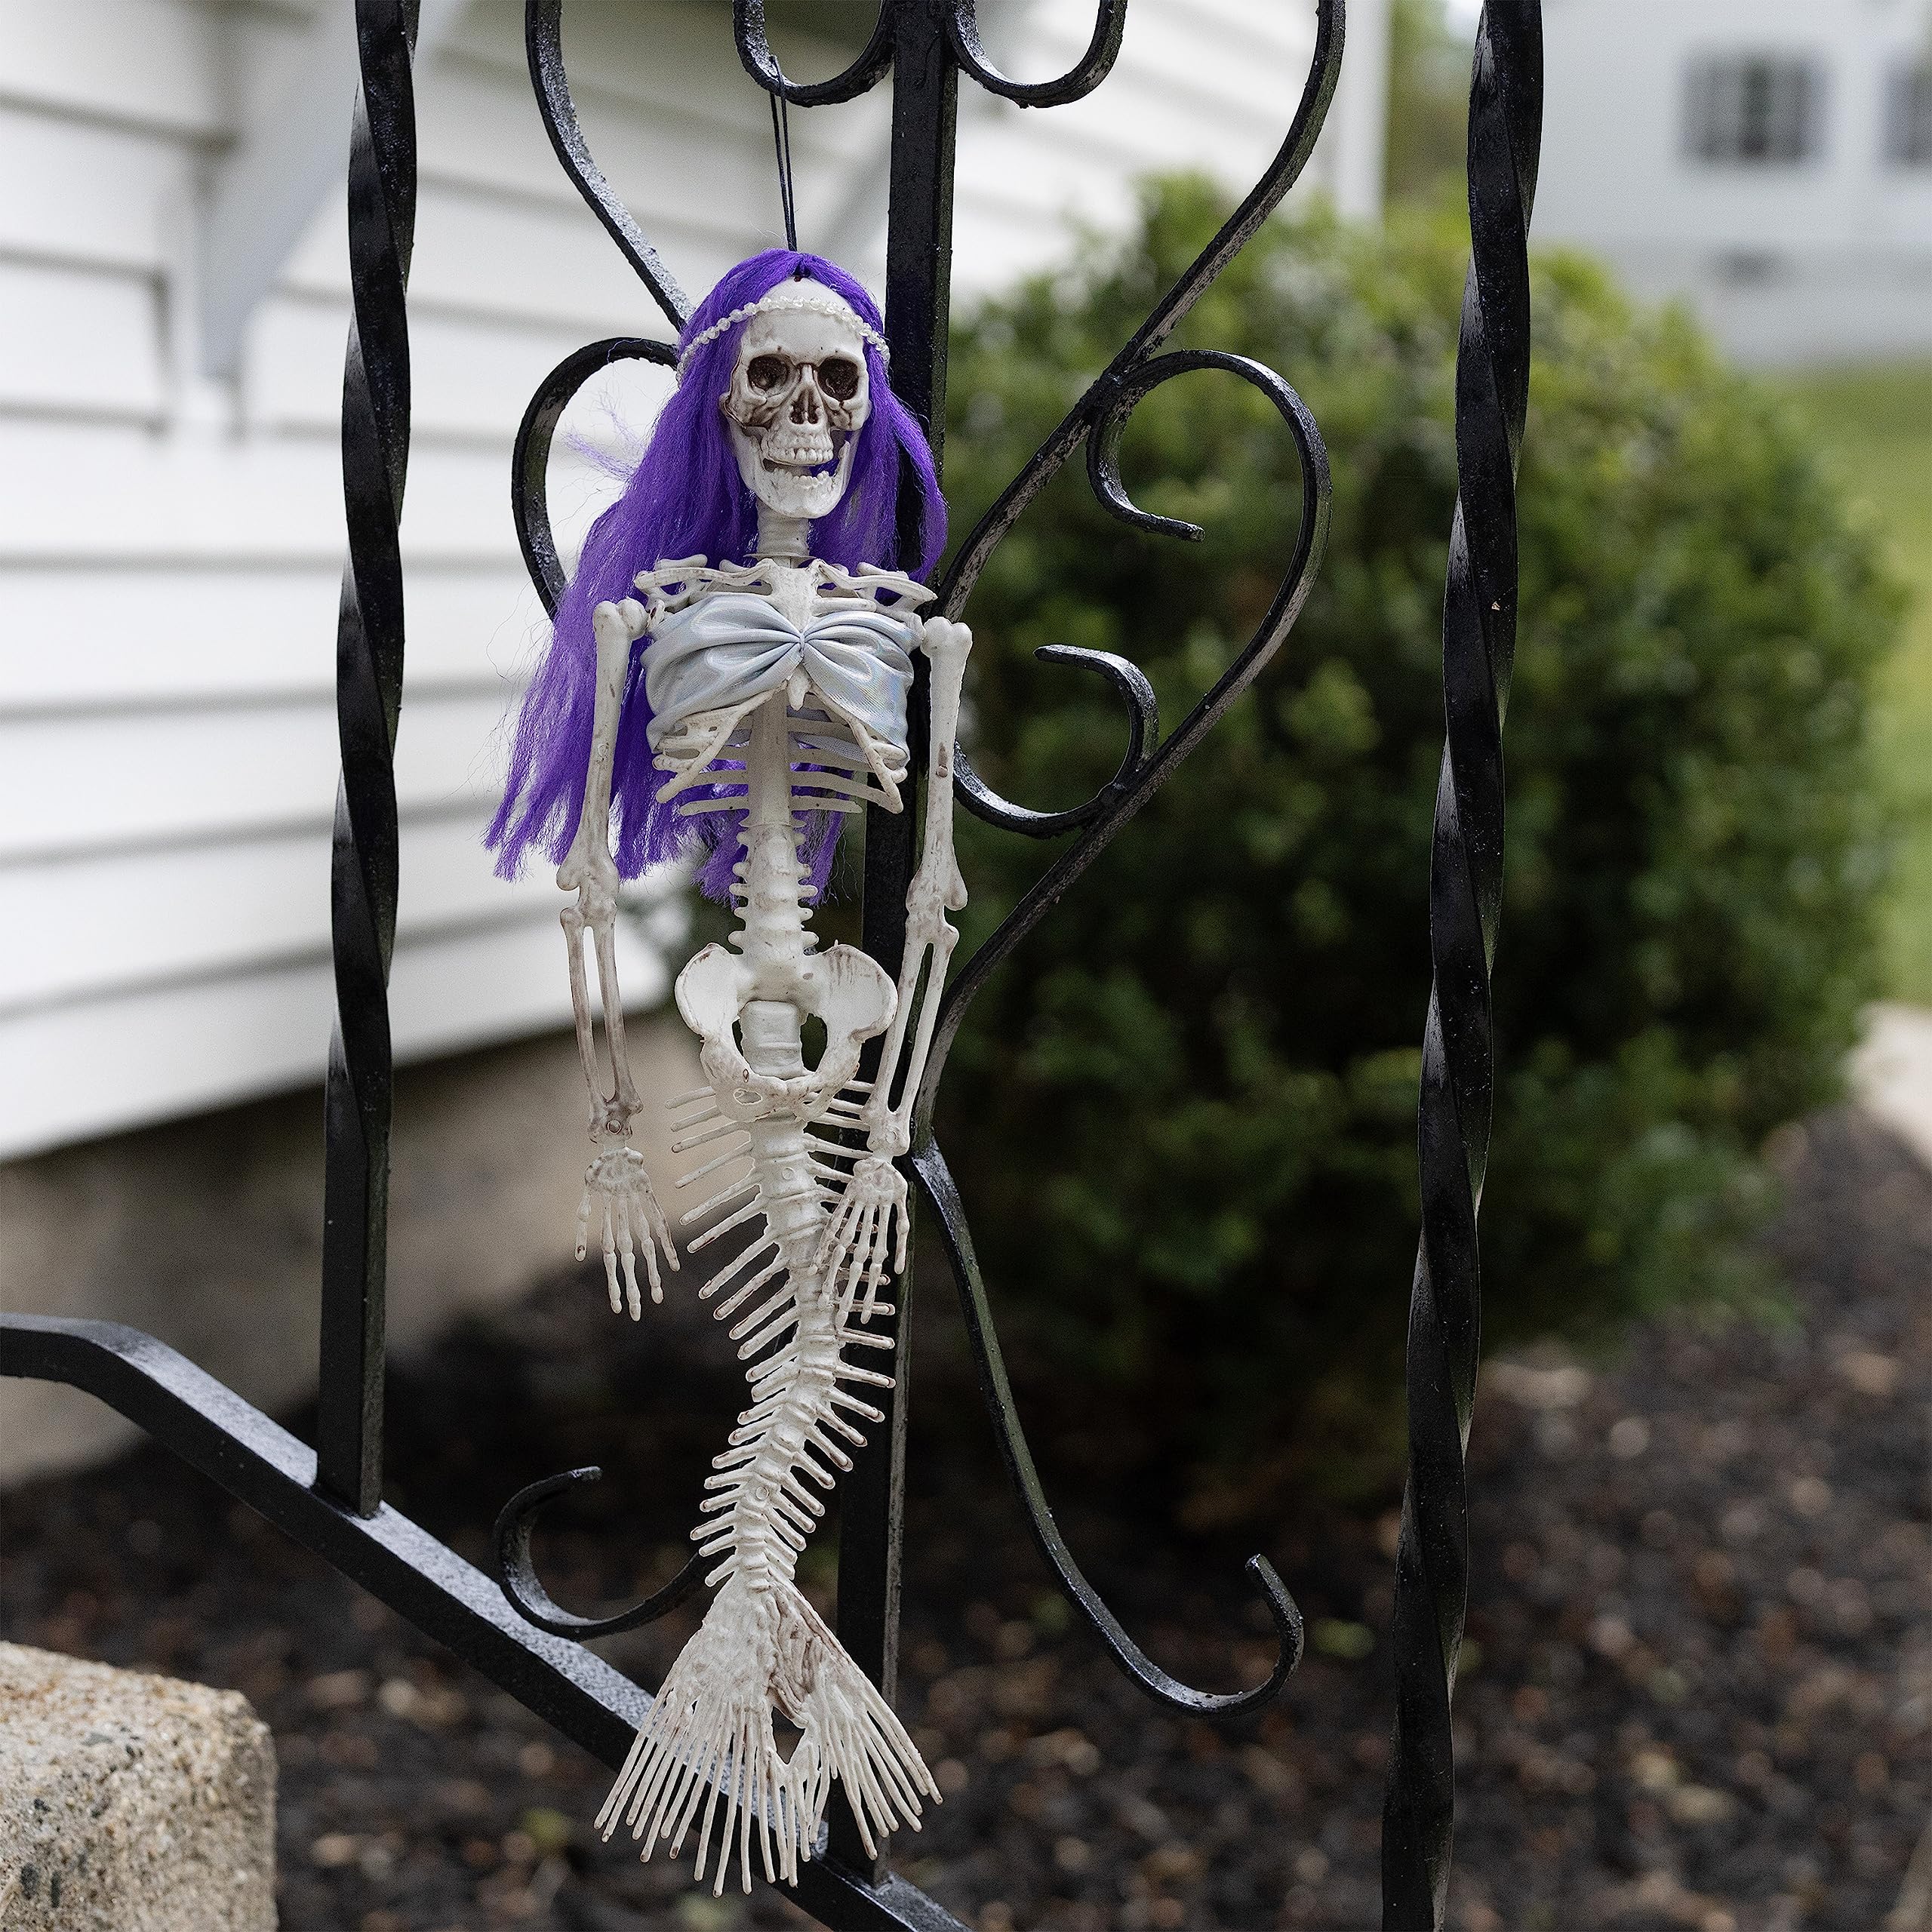 Mermaid Skeleton w Colored Hair Halloween Decorations (3 Pack)-16" Long- Weather Resistant for Indoor/Outdoor -Upgrade Your Fall Graveyard Haunted House or Cemetery Party Decor, Trick-or-Treat Favors